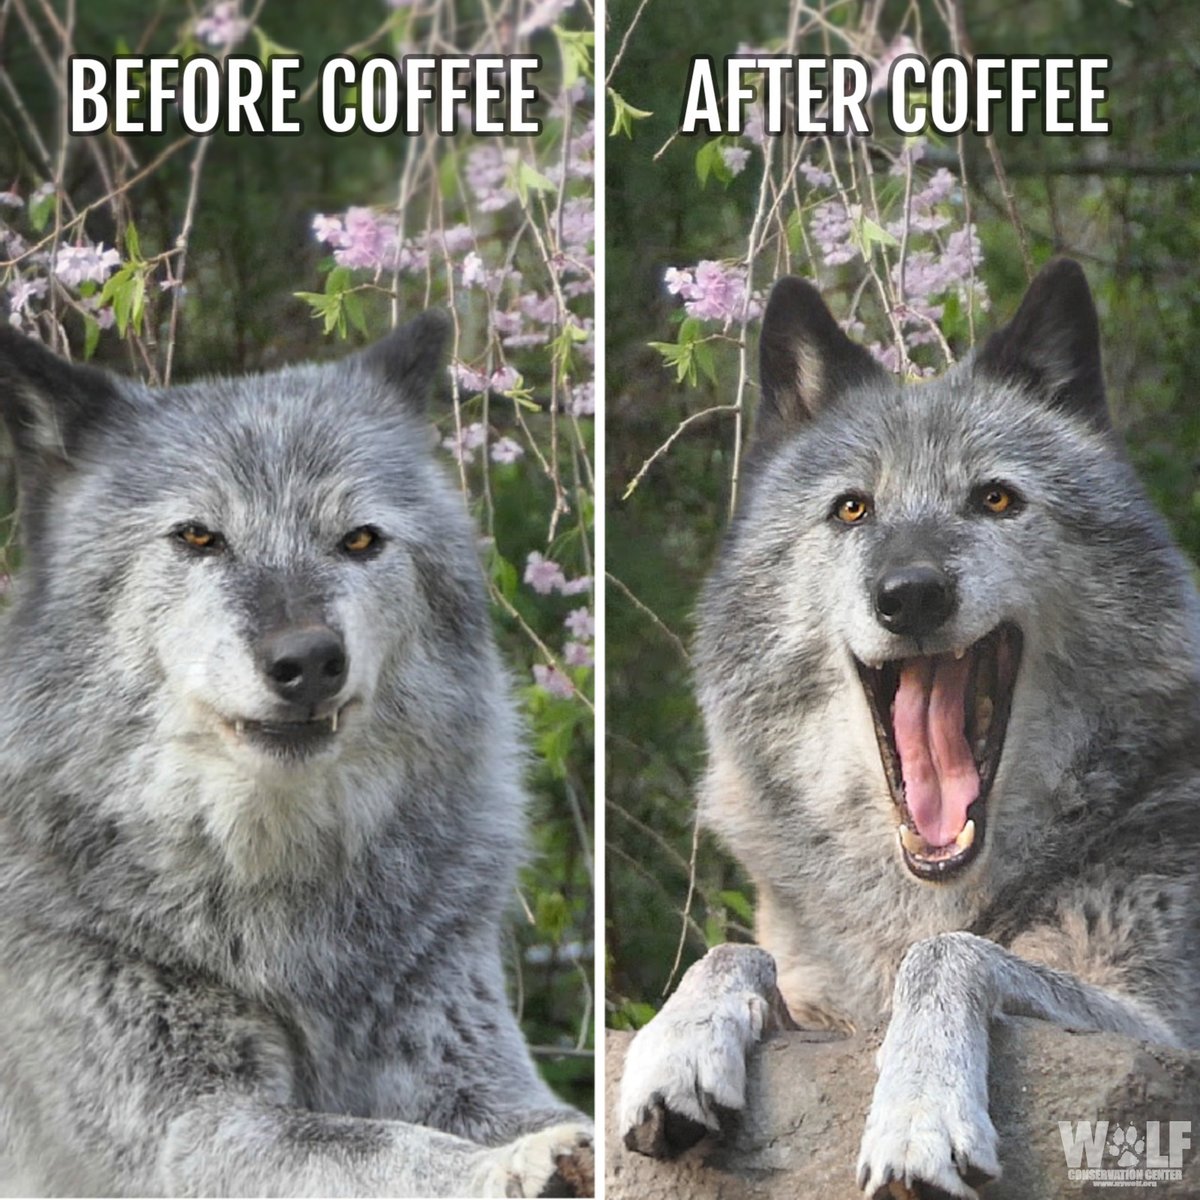 Wolves are essential. So is coffee 😉